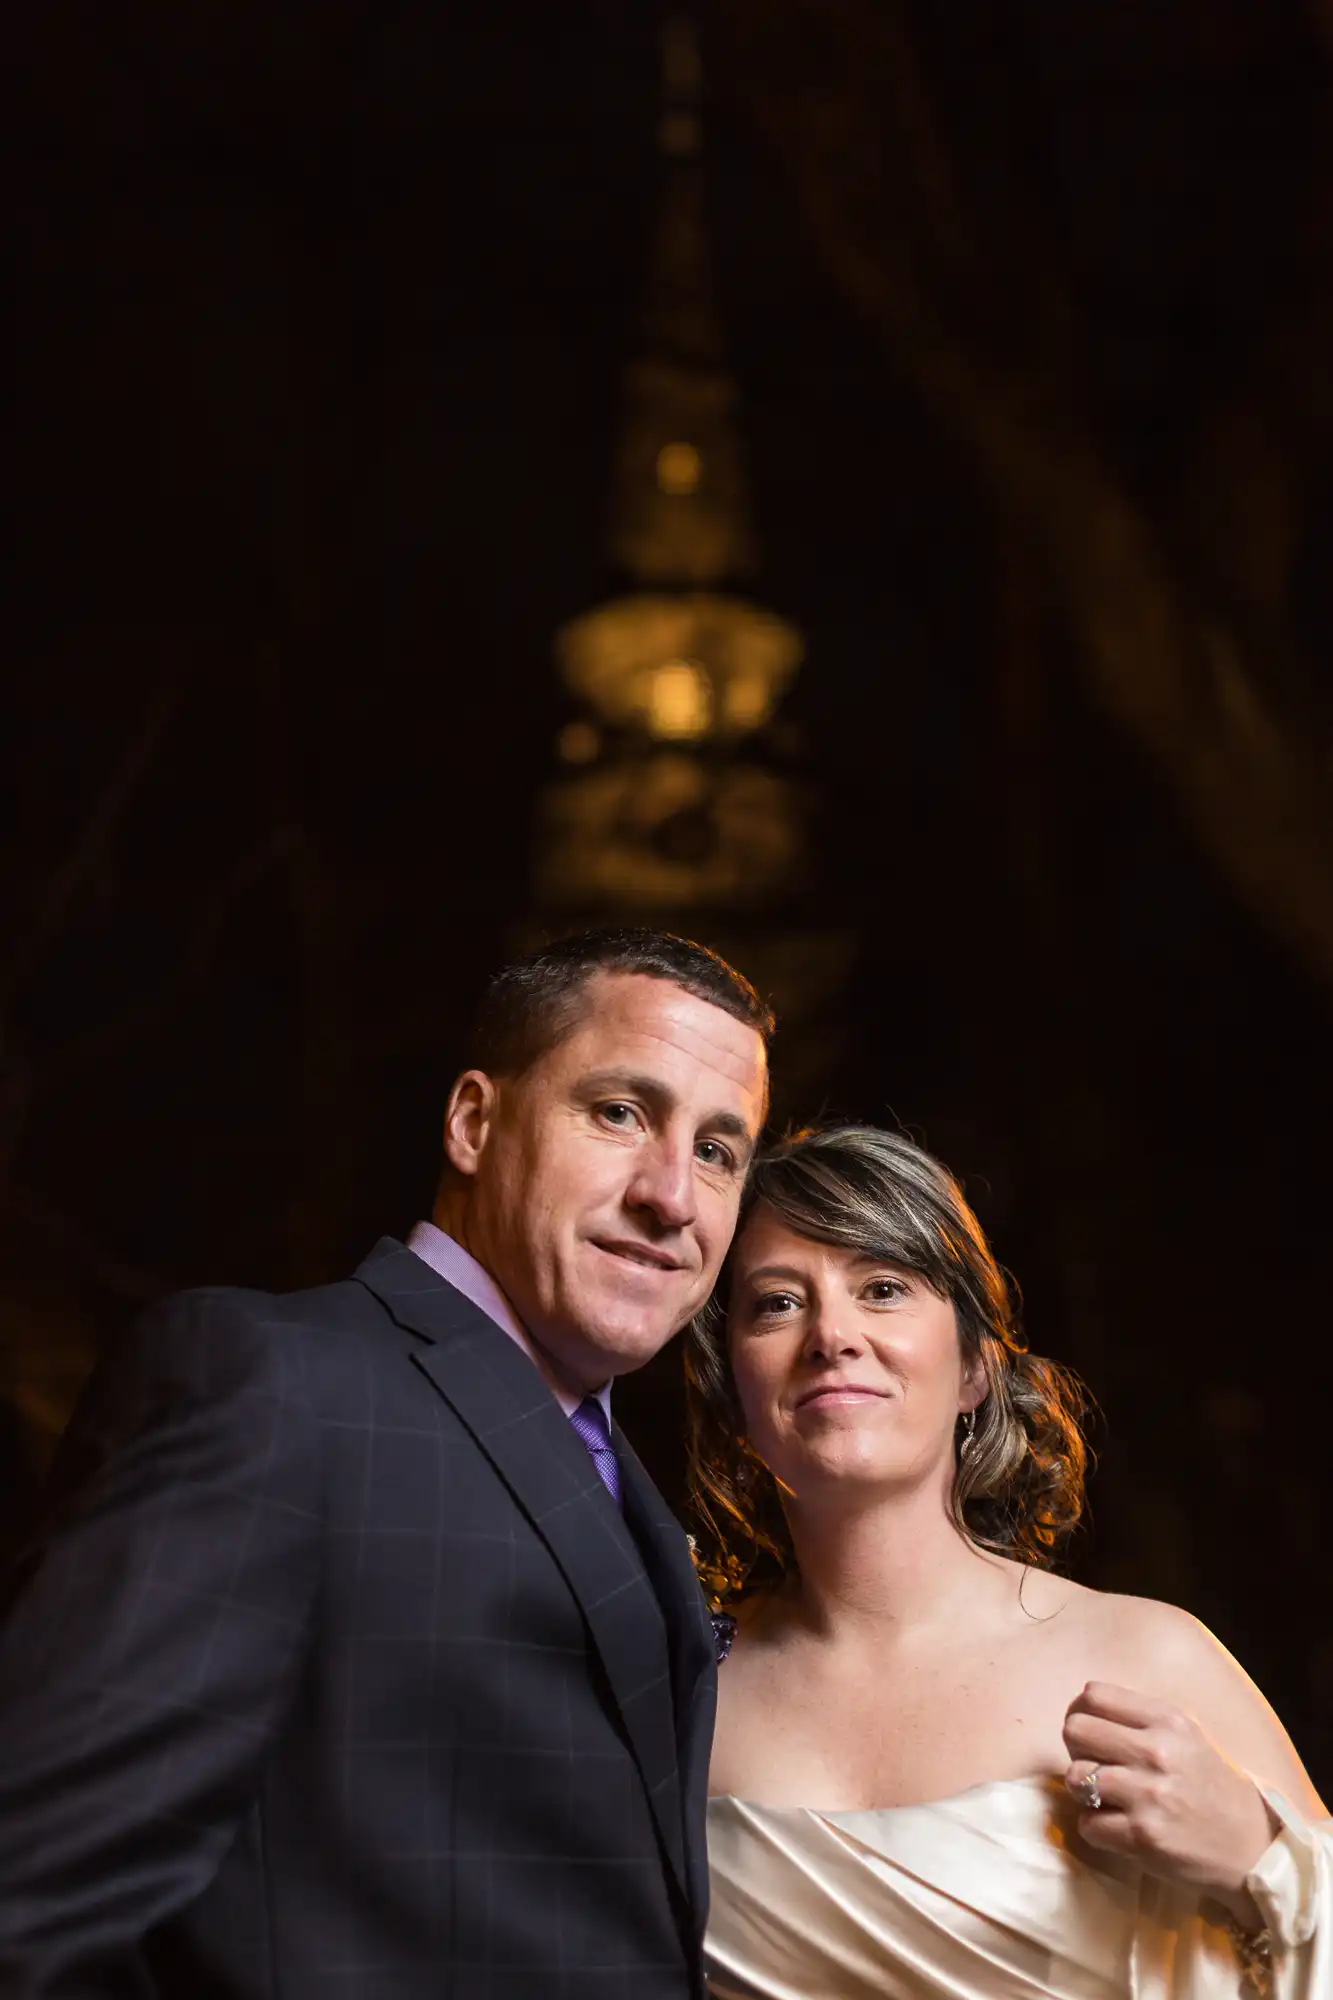 A couple posing for a portrait at night, with a softly lit, ornate spire in the background.